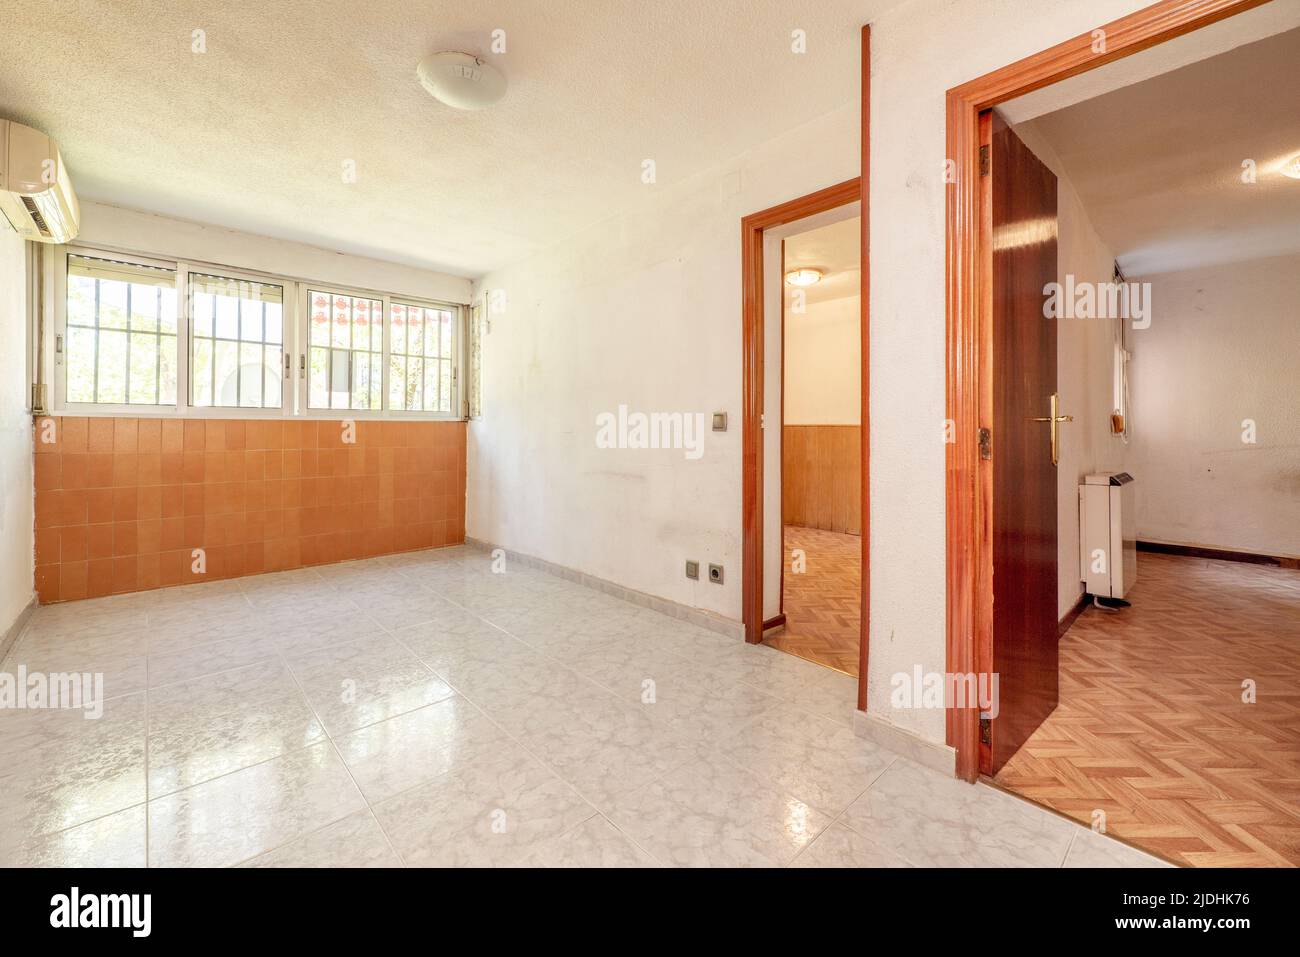 Empty room with access doors to other rooms with ceramic floors and a wall with brown tiles Stock Photo